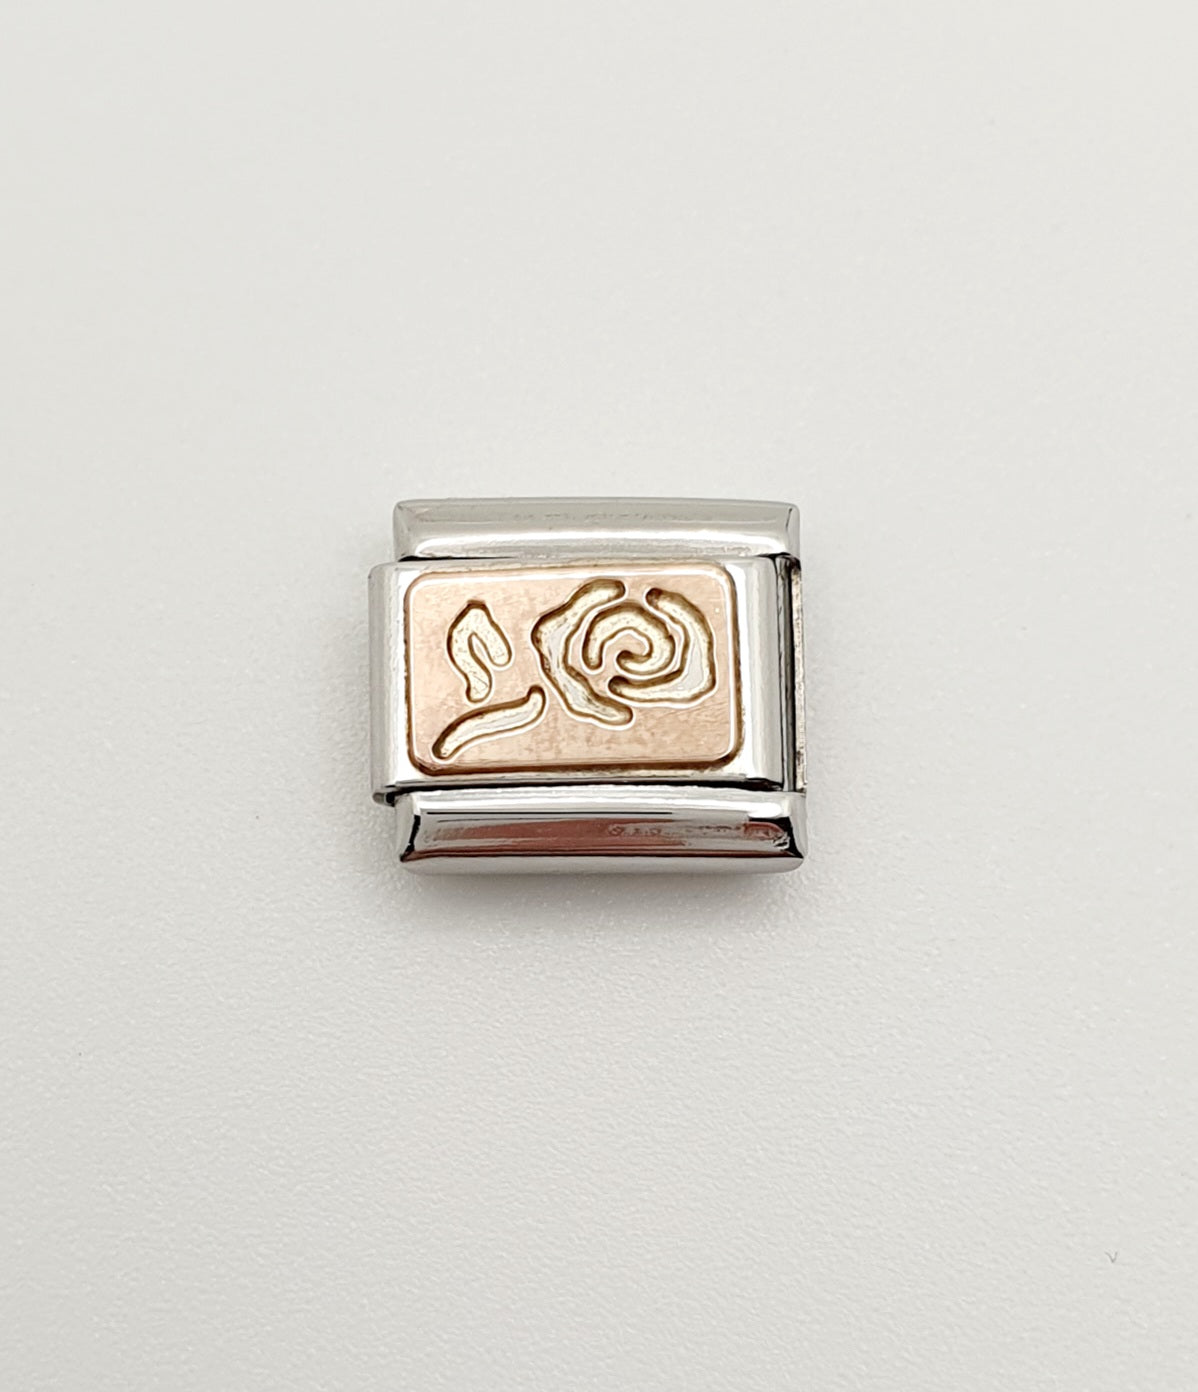 Nomination Charm Link "Rose" Stainless Steel with 9k Rose Gold, 430101 13